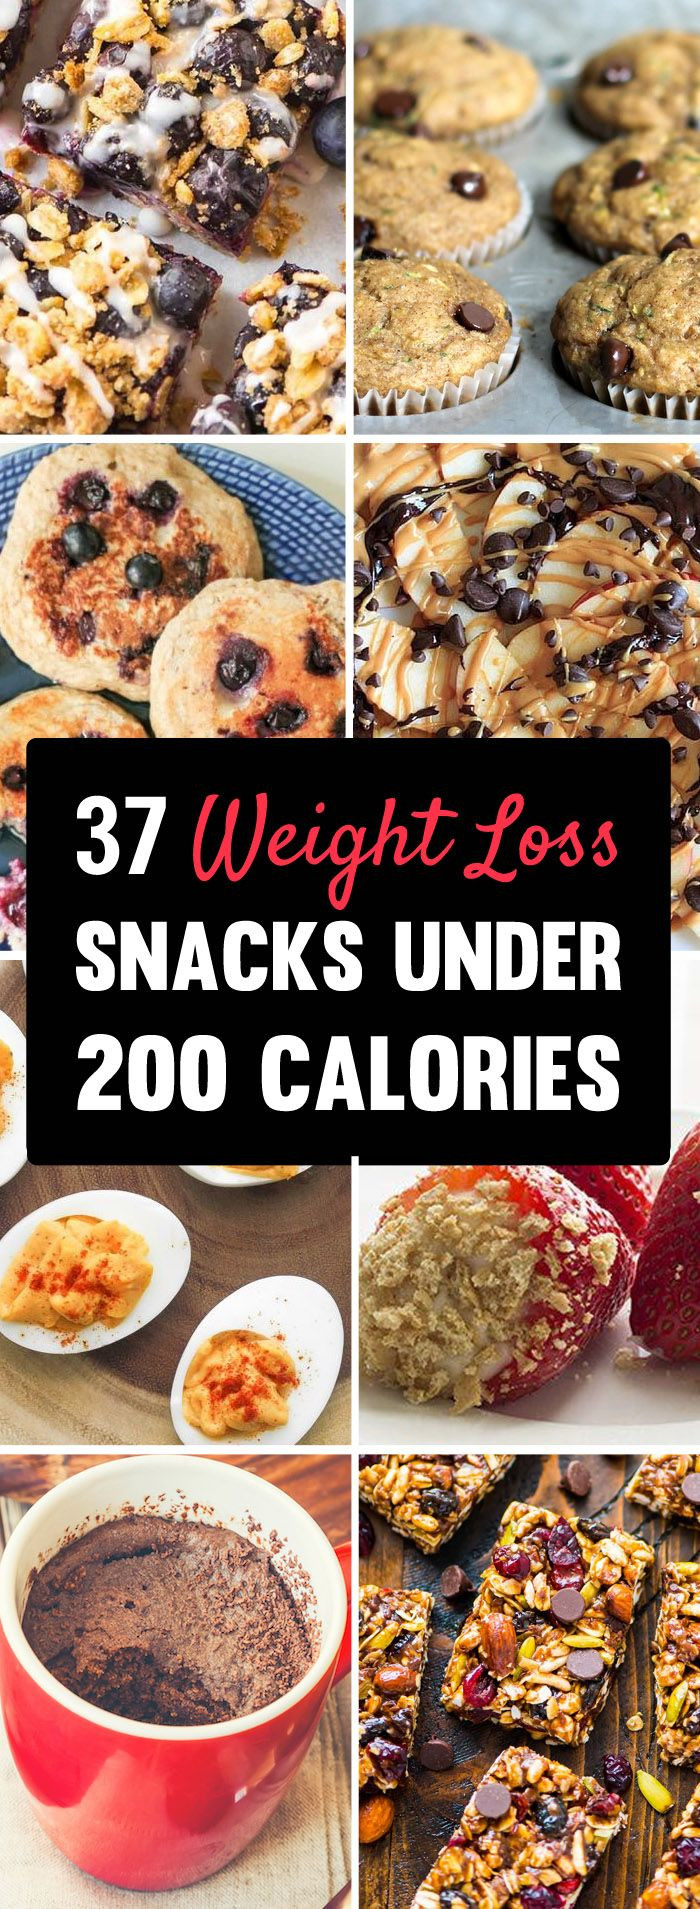 Healthy Snacks You Can Eat All Day
 Best 25 Weight loss snacks ideas on Pinterest